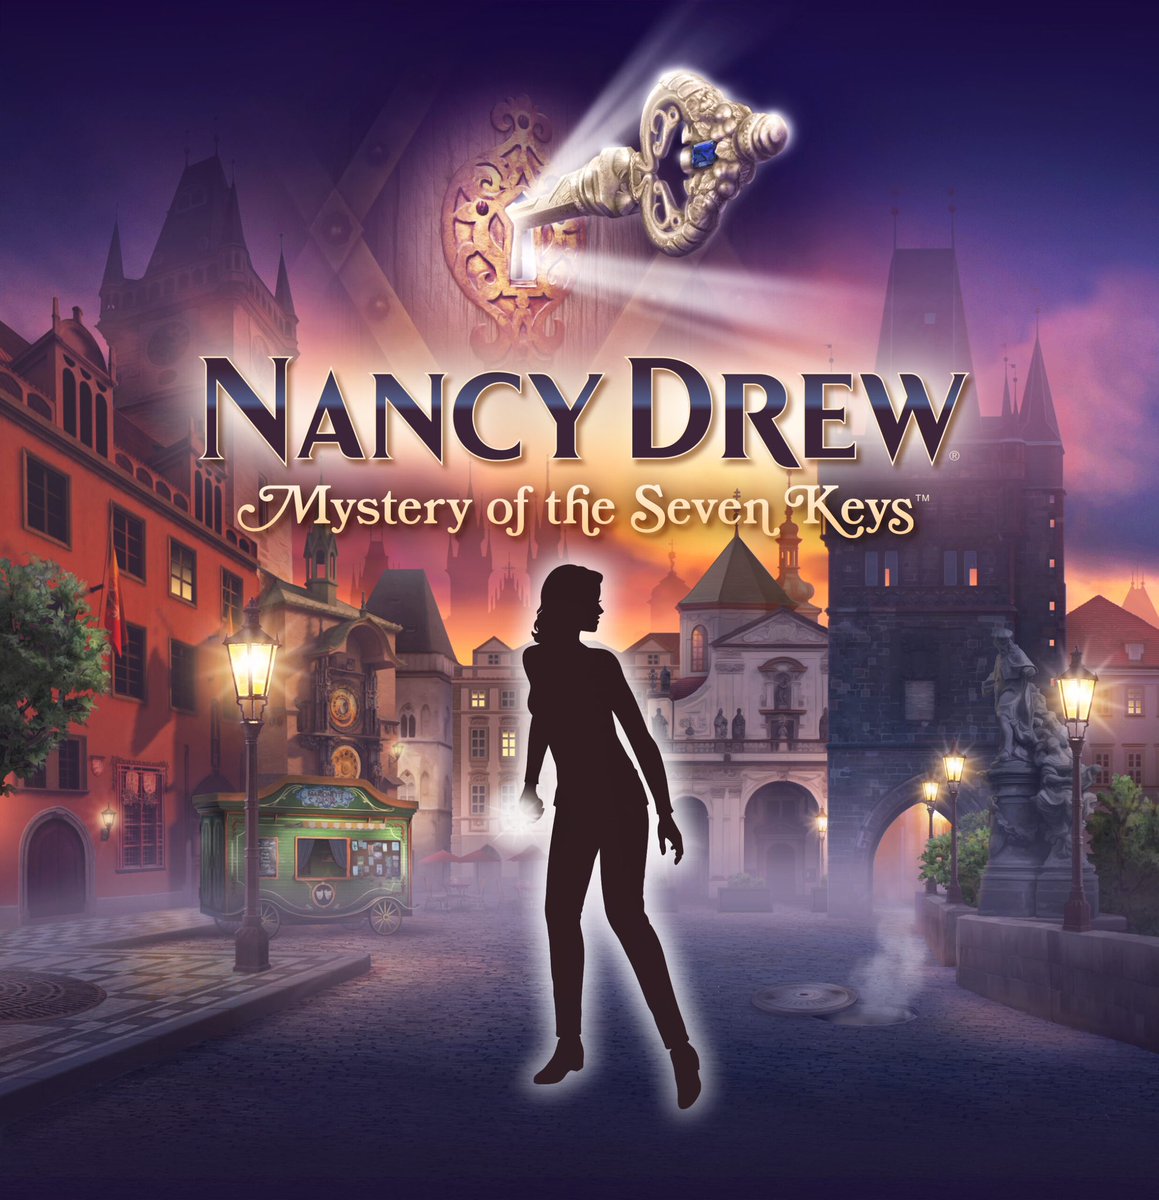 I am so excited to play this tomorrow!!!! Get hyped guys! 
#nancydrew